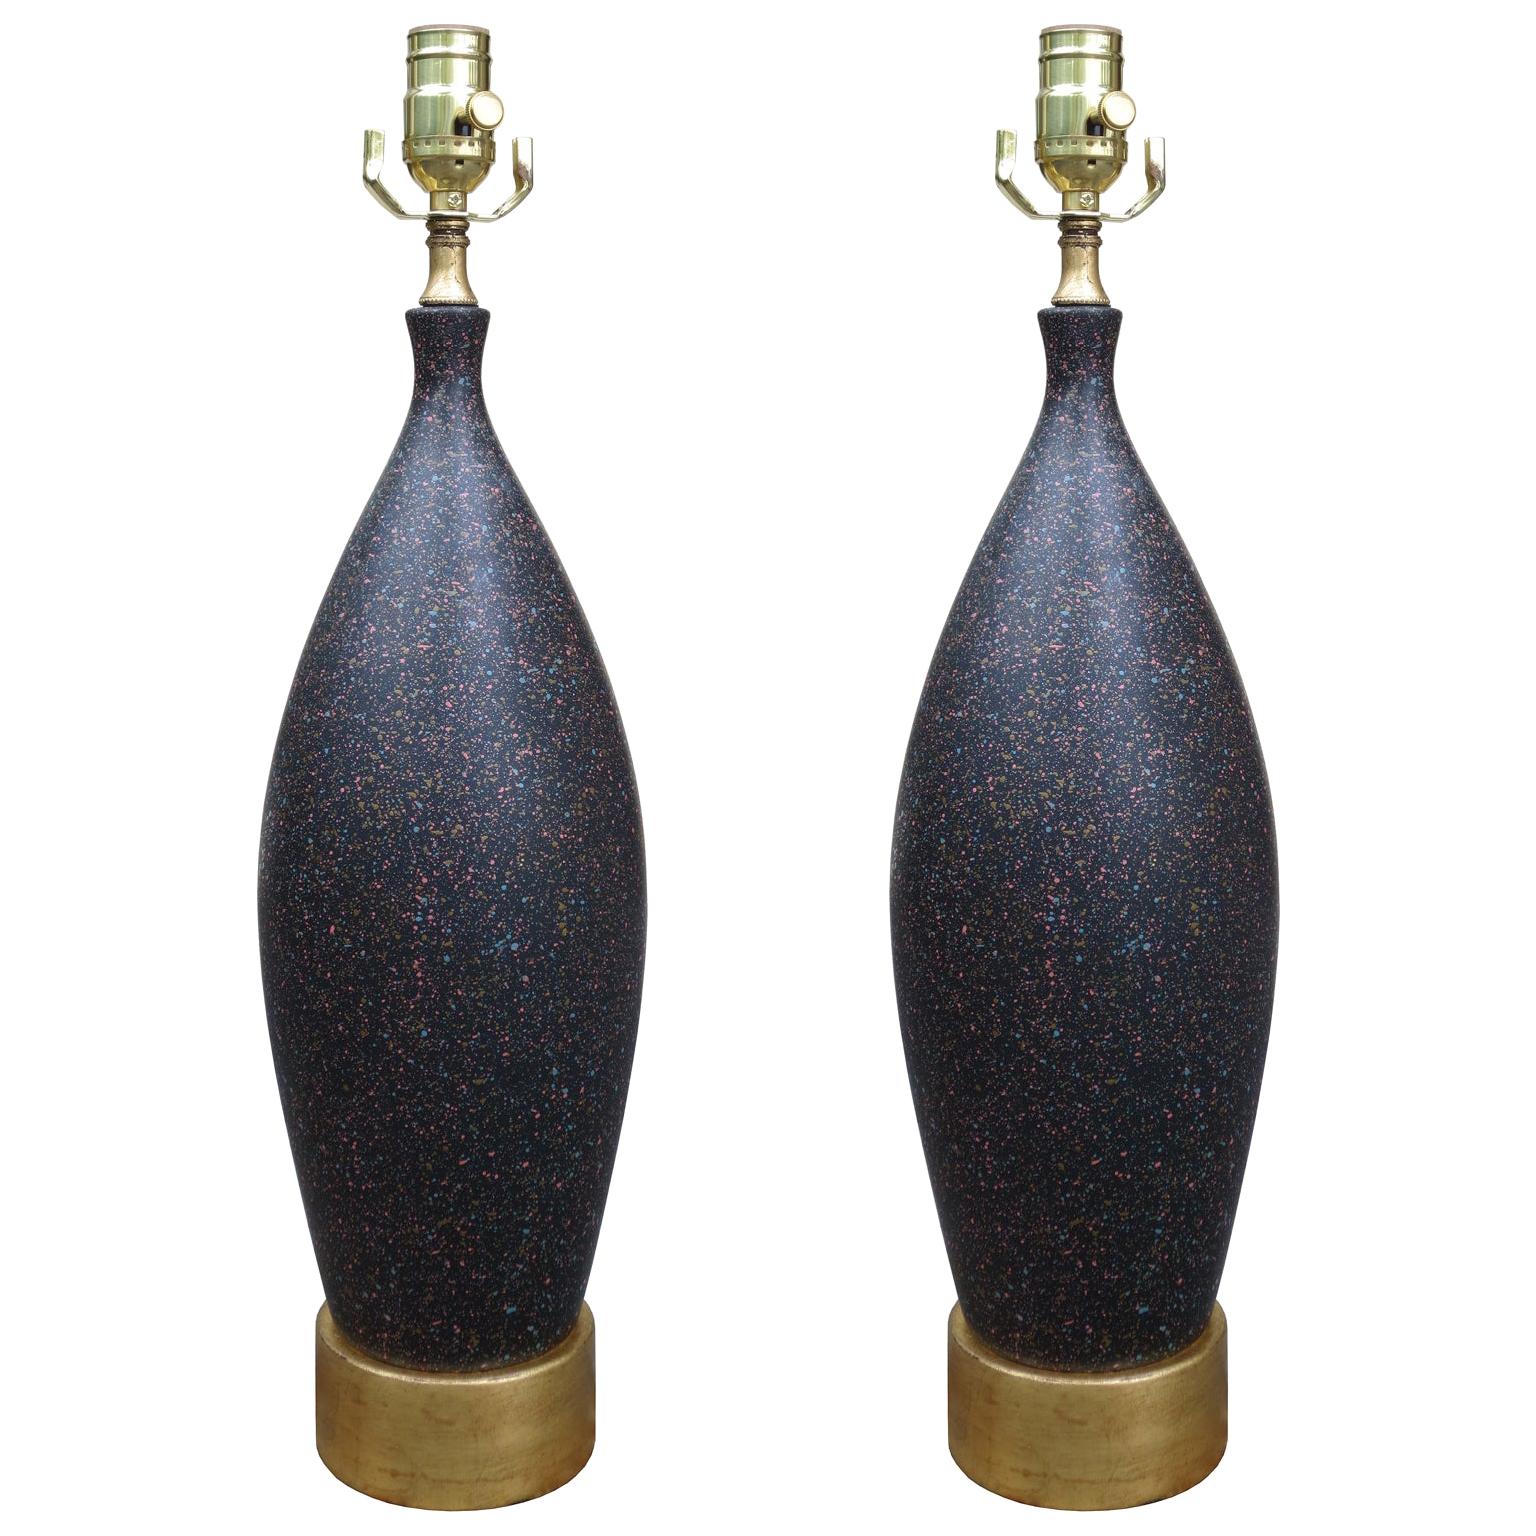 Pair of Mid-20th Century Black Pottery Lamps on Custom Gilt Bases